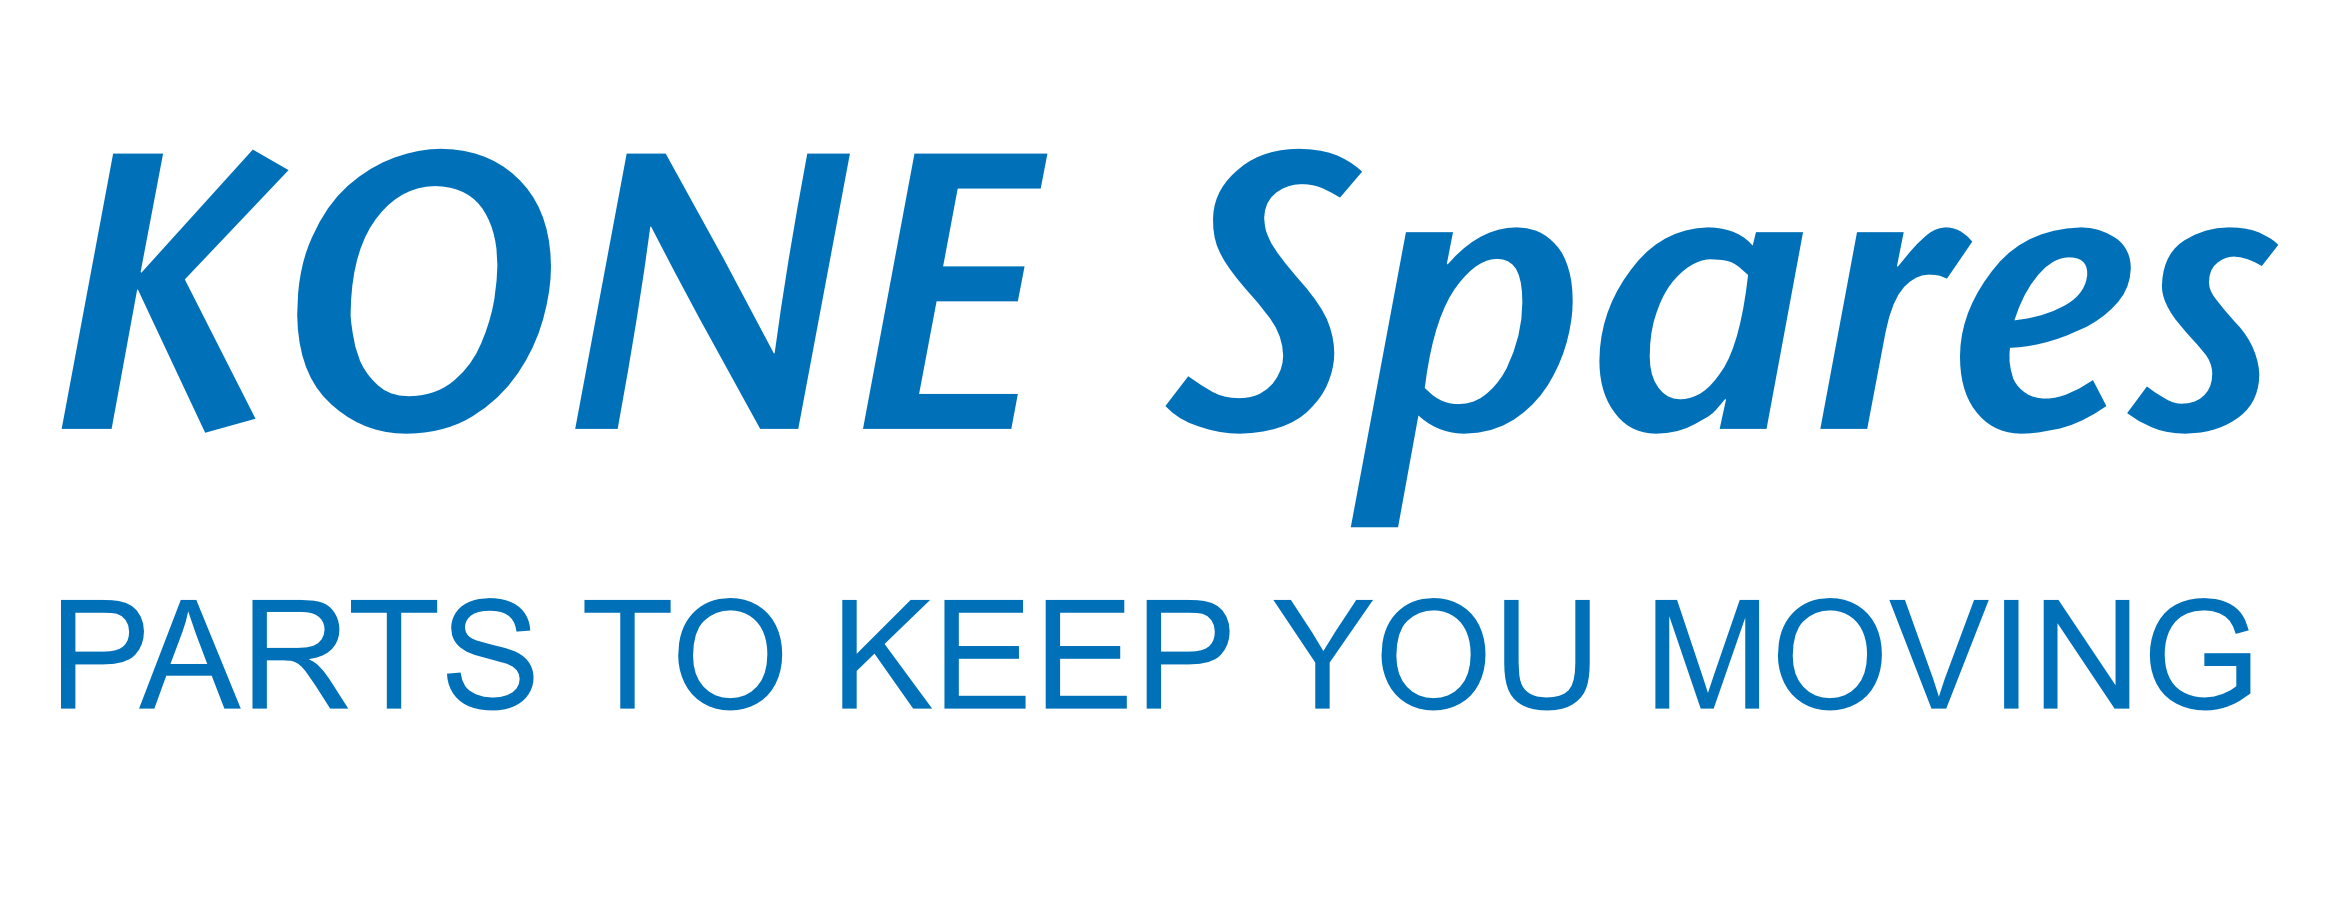 LOGO KONE Spares PARTS TO KEEP YOU MOVING 002